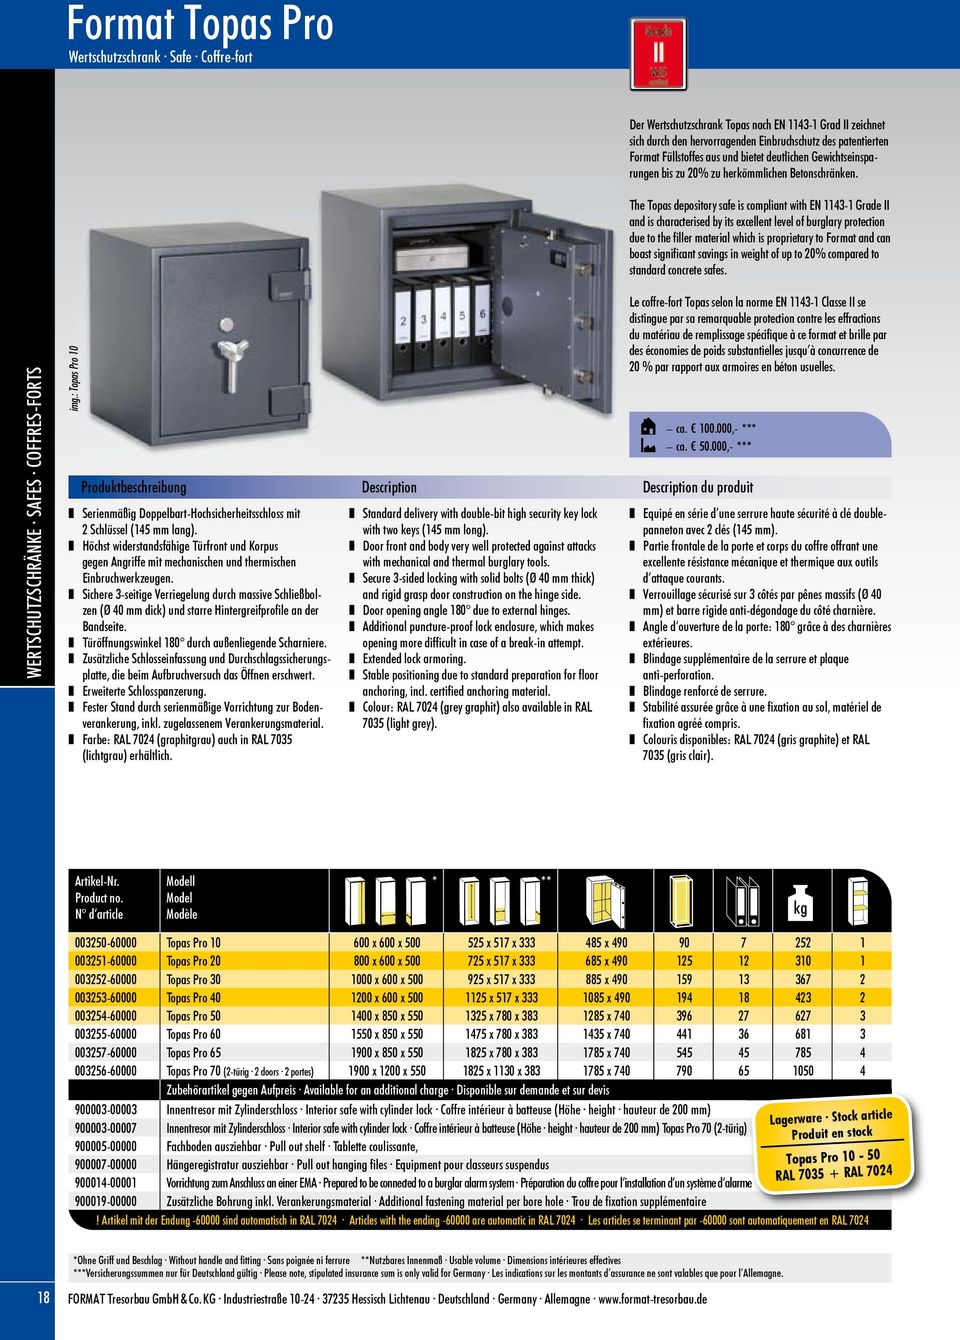 the topas depository safe is compliant with en 114-1 Grade II and is characterised by its excellent level of burglary protection due to the filler material which is proprietary to Format and can